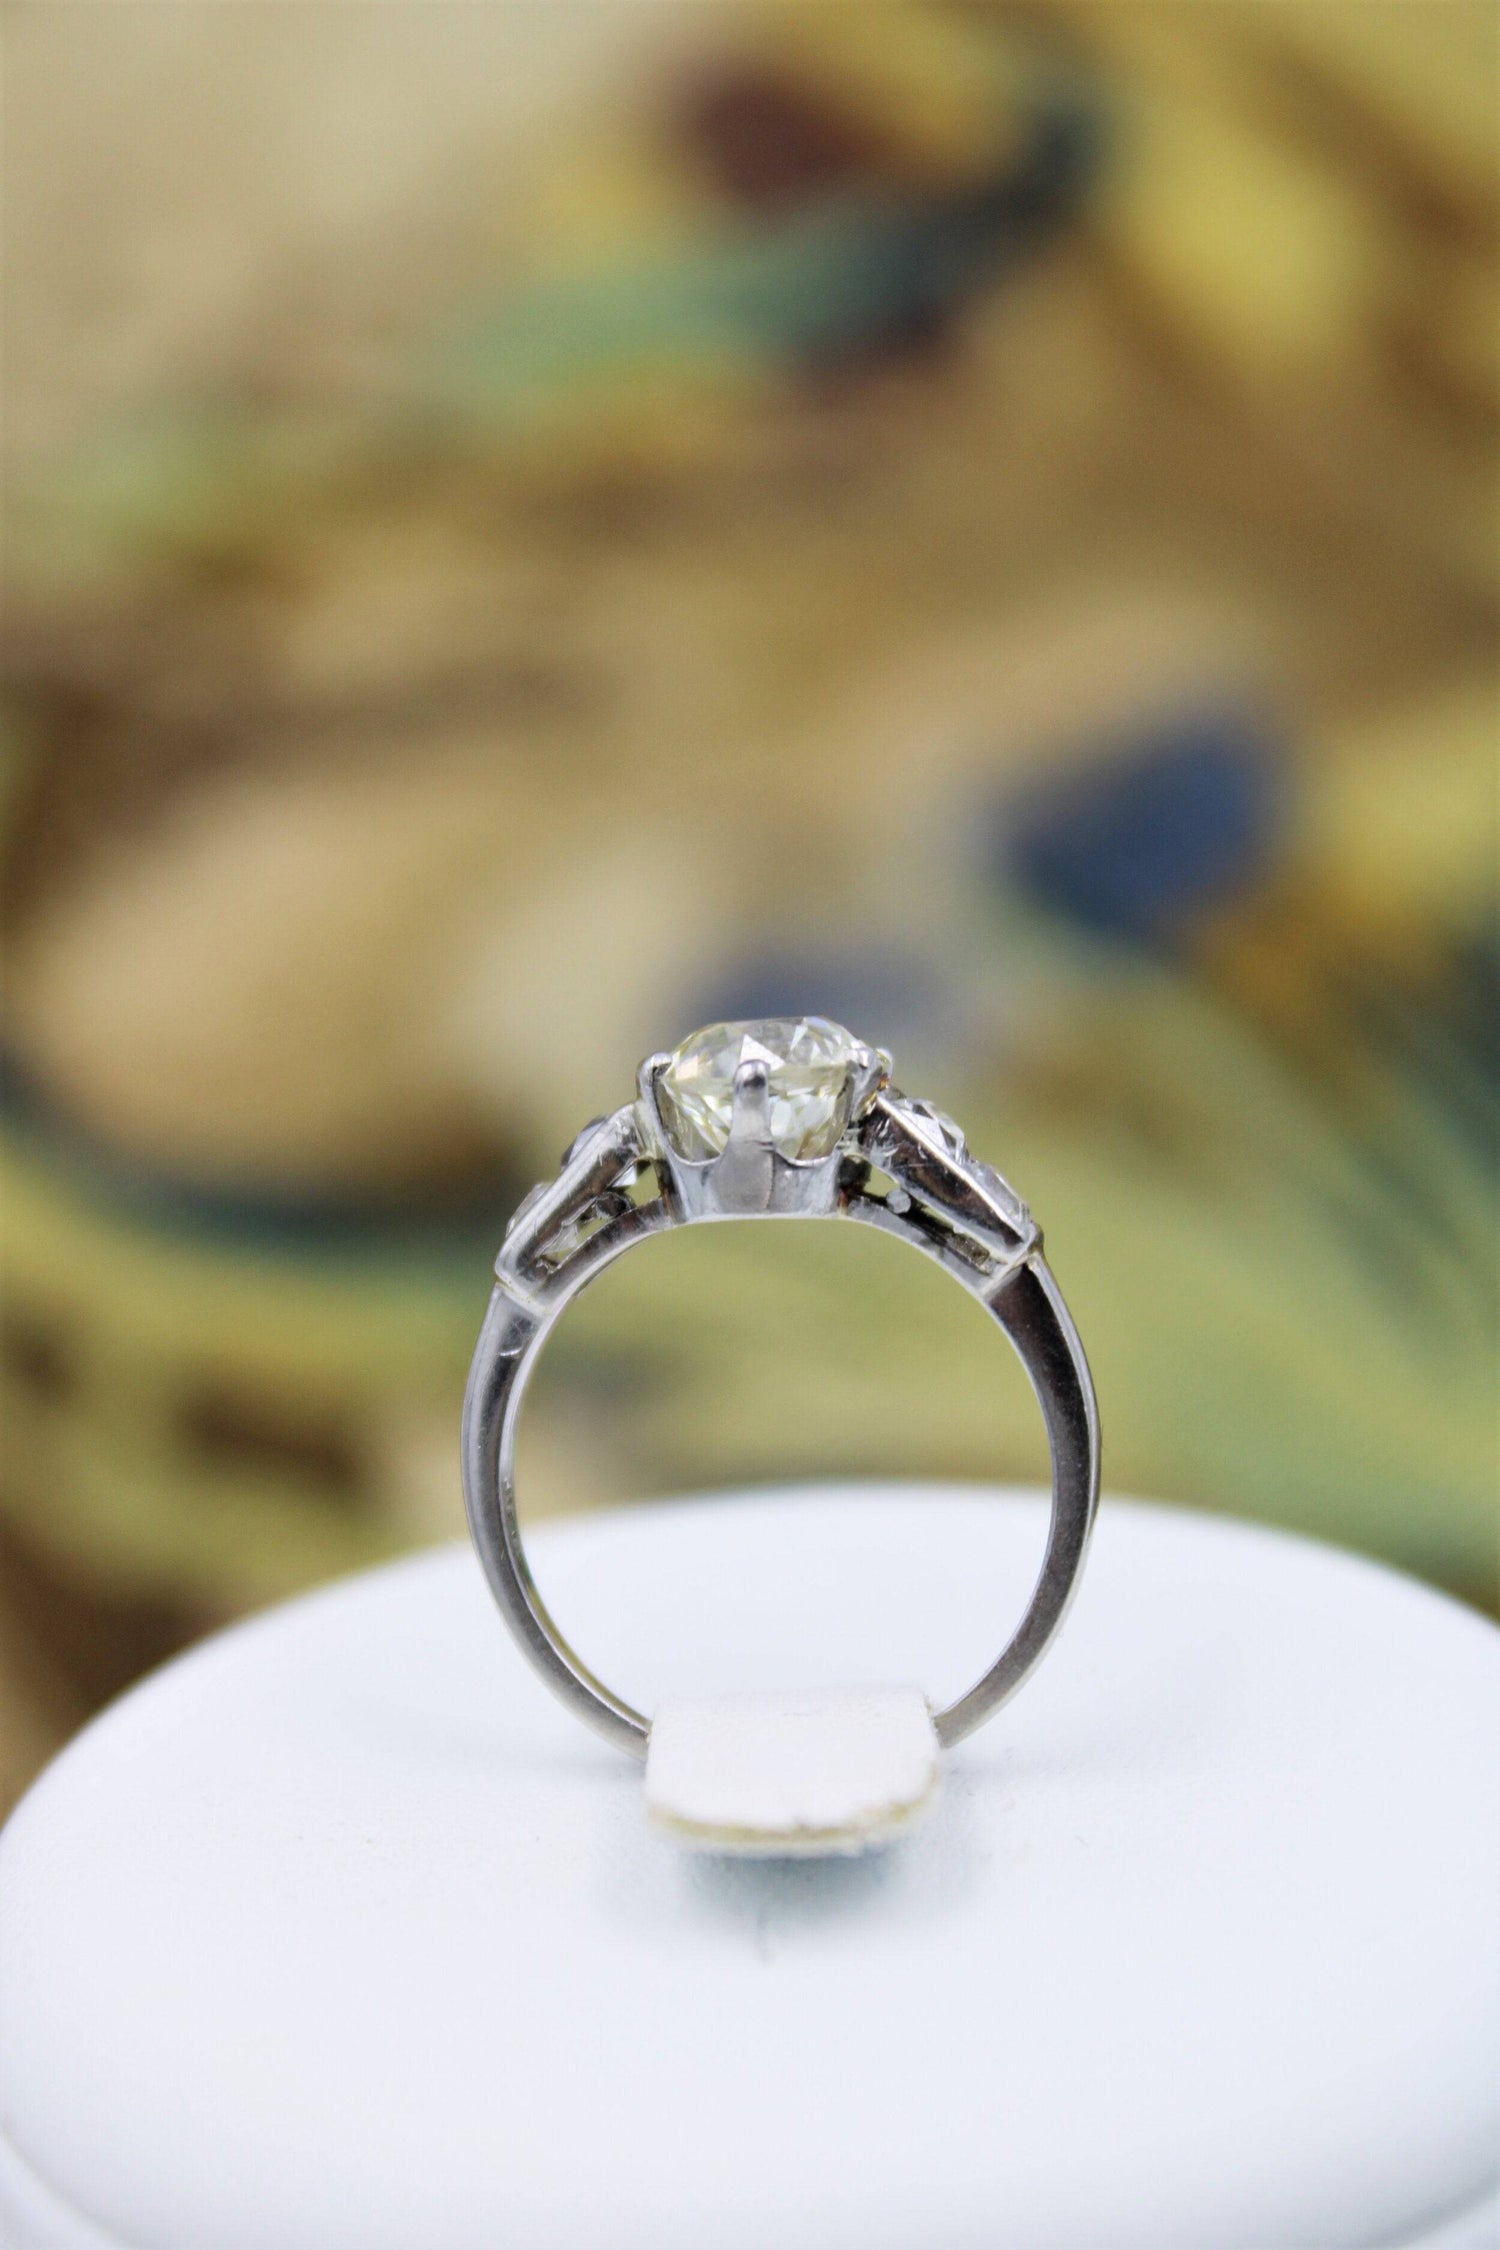 A very fine 1.60ct Old Cut Diamond & Platinum Solitaire Ring with French Cut Shoulders, English, Circa 1930 - Robin Haydock Antiques